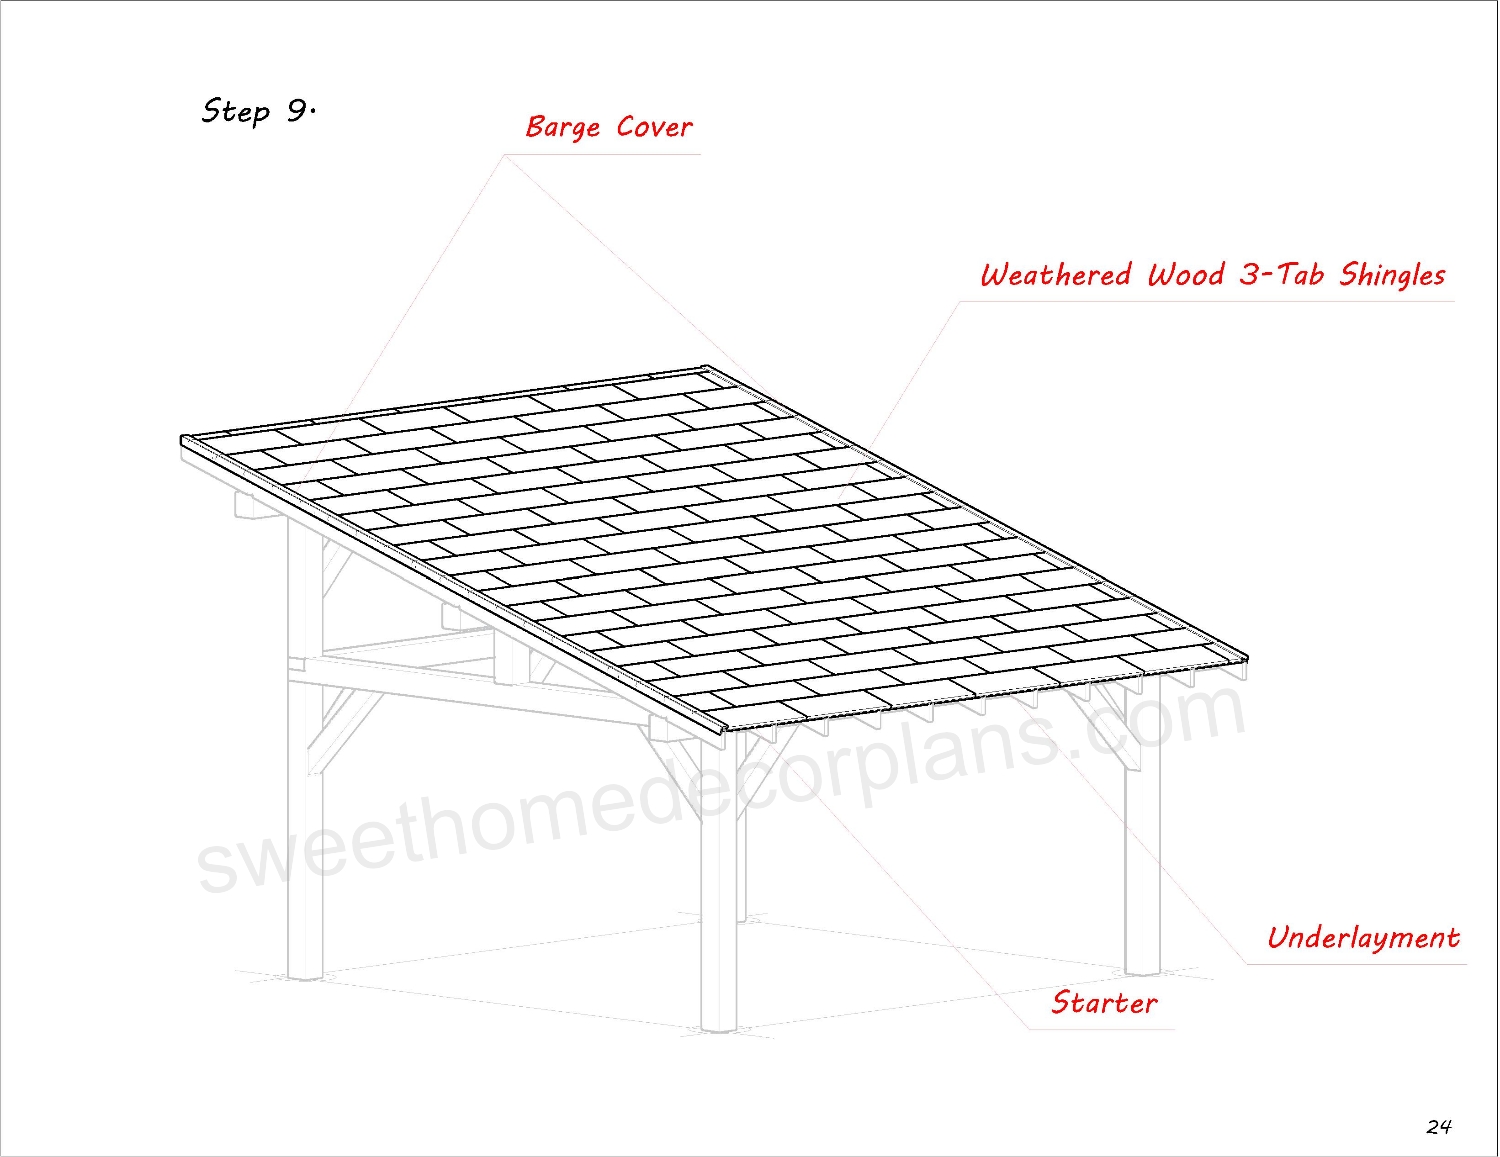 Diy-16-x-16-lean-to-pavilion-roof-plans-in-pdf-for-outdoor